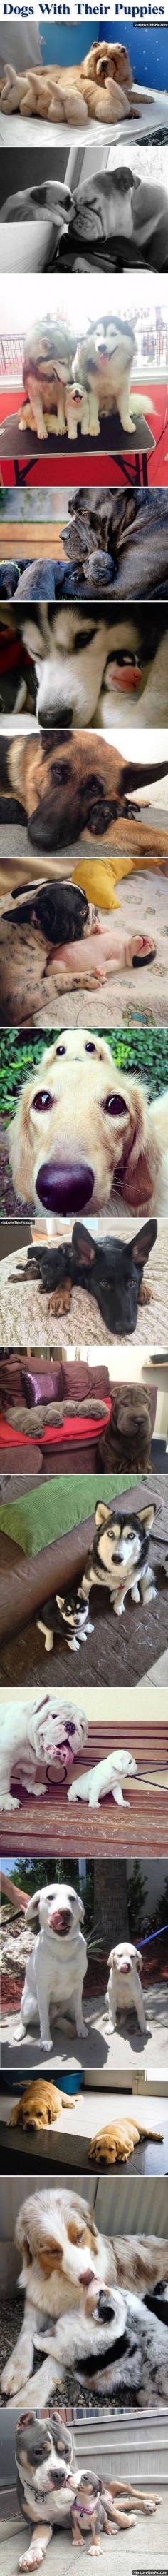 Dogs With Their Puppies cute animals dogs adorable dog puppy animal pets funny animals funny pets funny dogs